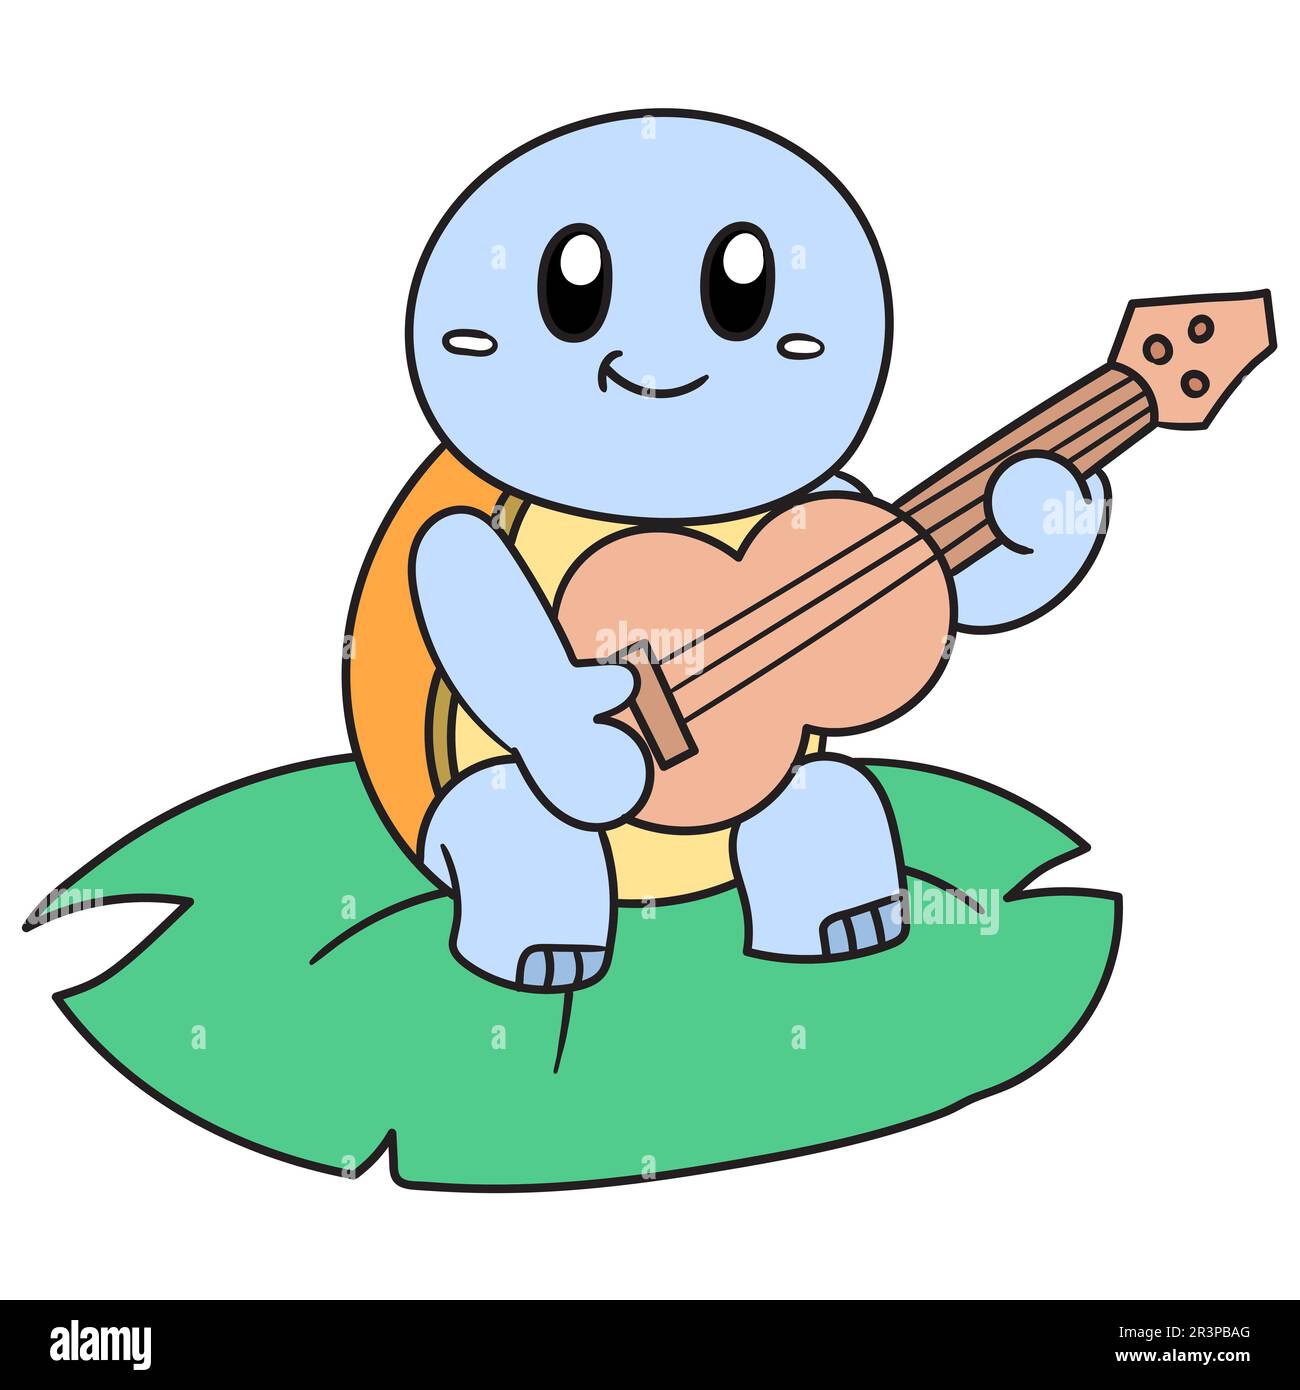 A turtle on a leaf playing music using a guitar, doodle kawaii. doodle icon image Stock Photo